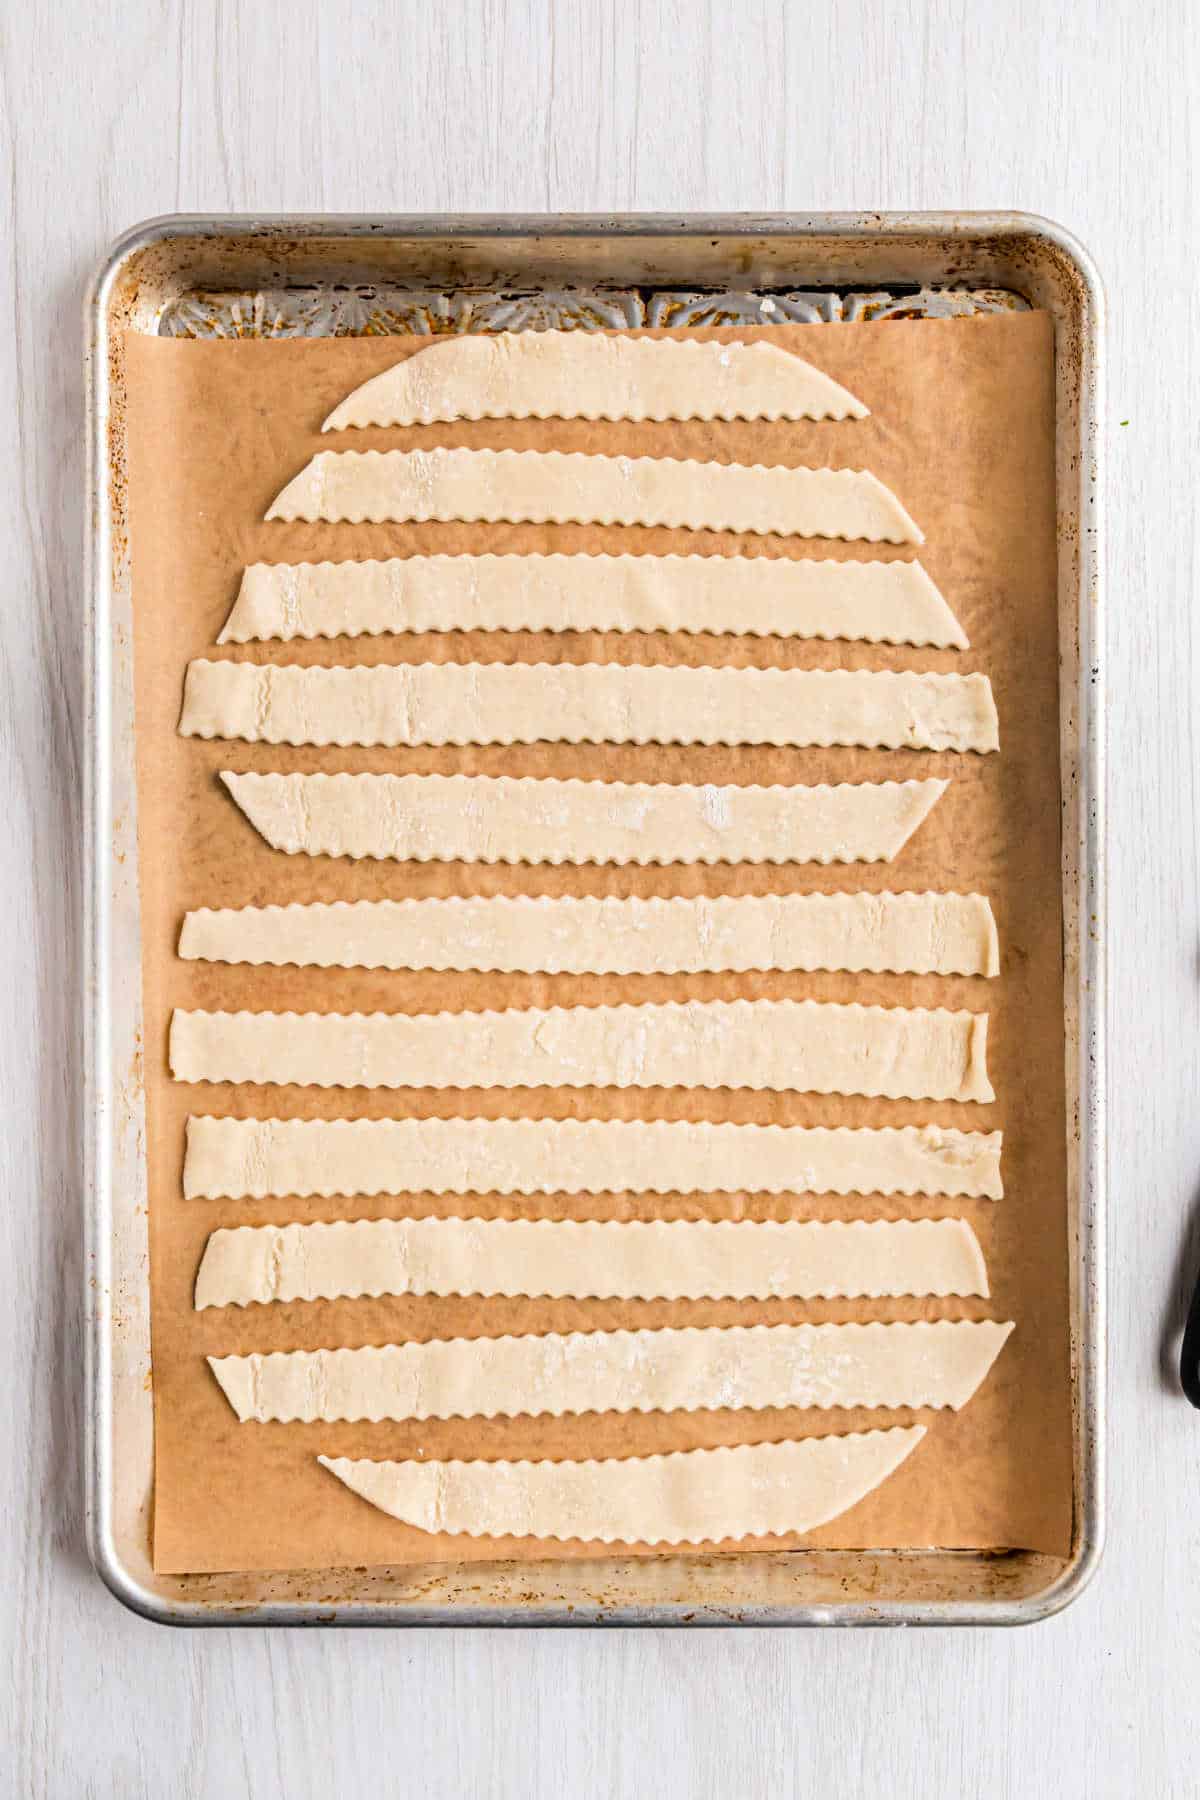 Pie crust on a parchment paper baking sheet cut into strips.